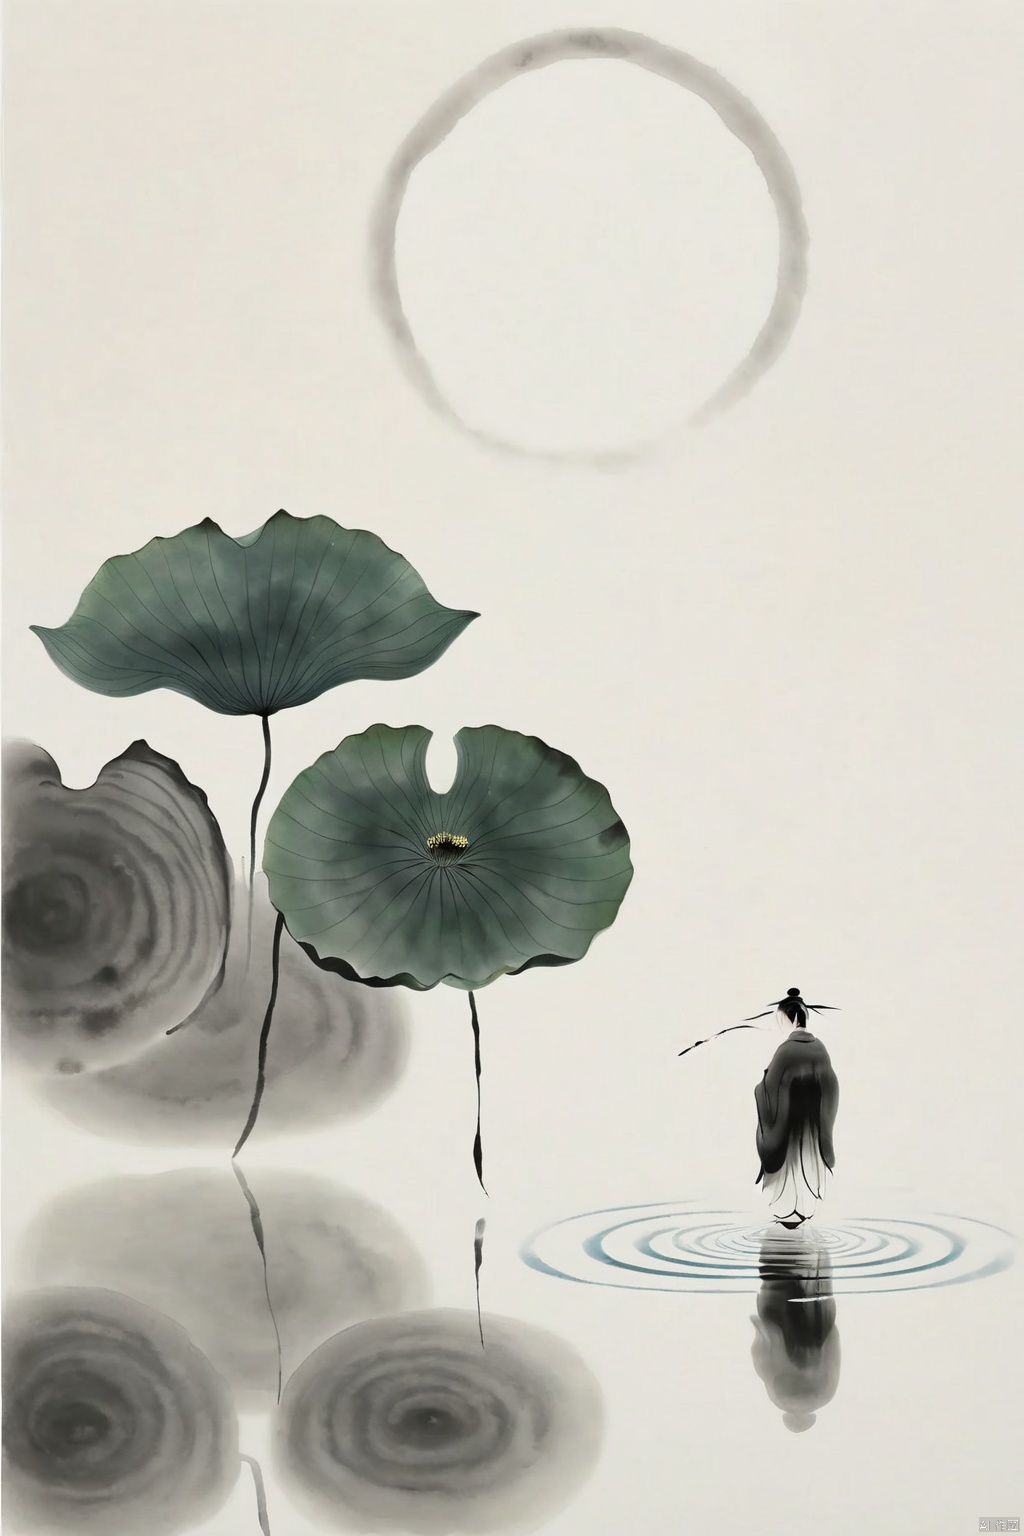 Lotus, Dragonfly /(standing on lotus)/), water halo, minimalist ink painting